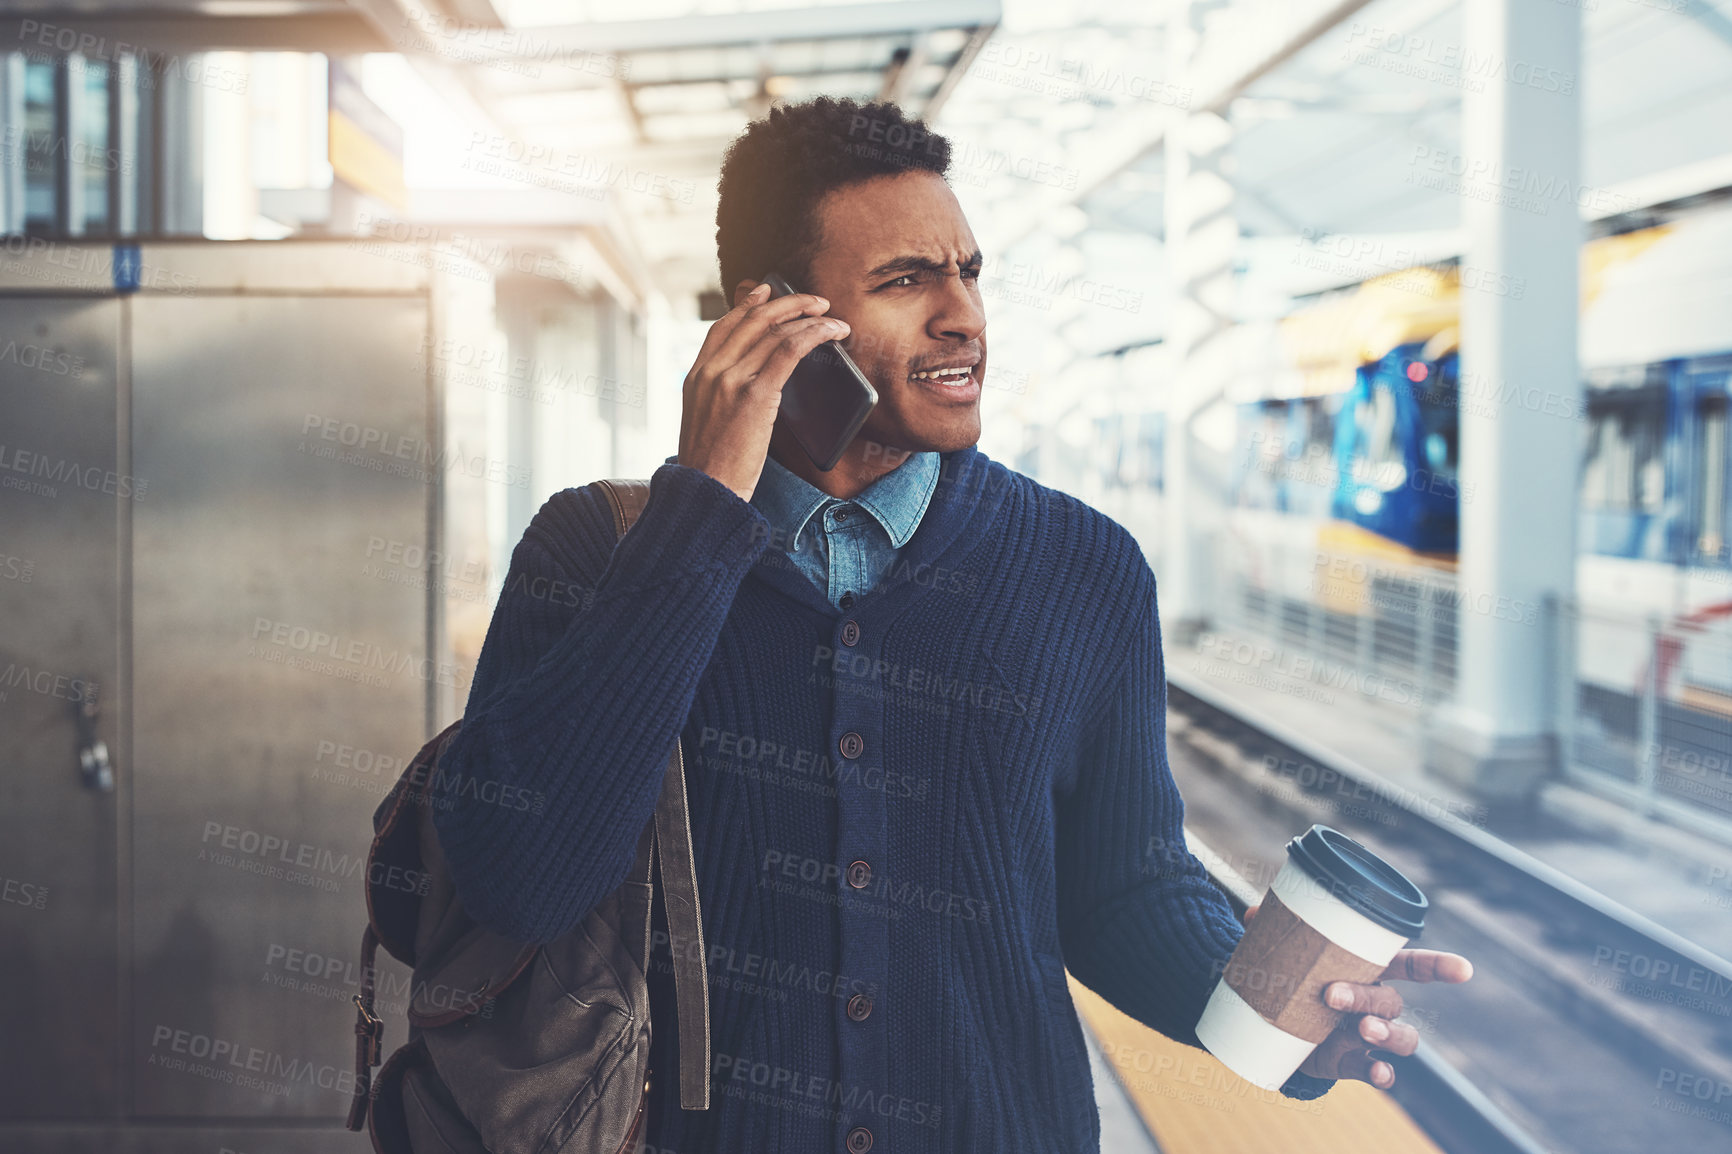 Buy stock photo Shot of a young businessman using a mobile phone while walking through the subway